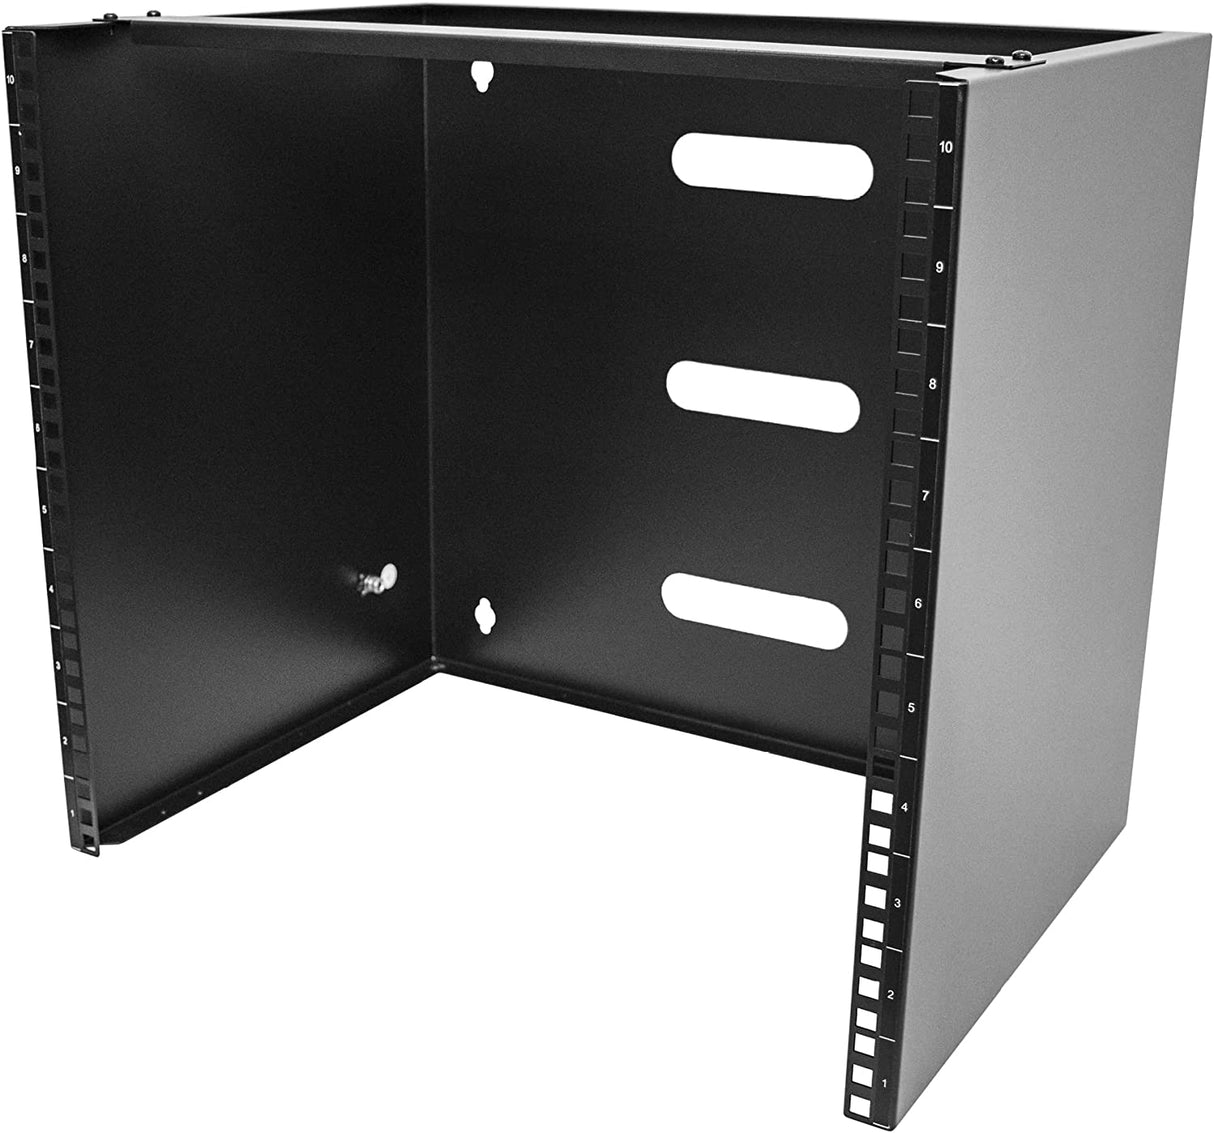 StarTech.com 10U Wall Mount Network Rack, 14 in Deep (Low Profile), 19" Patch Panel Bracket for Shallow Server, IT Equipment, Network Switches, 77lbs/35kg Weight Capacity, Black (RACK-10U-14-BRACKET) 10U Panel Bracket